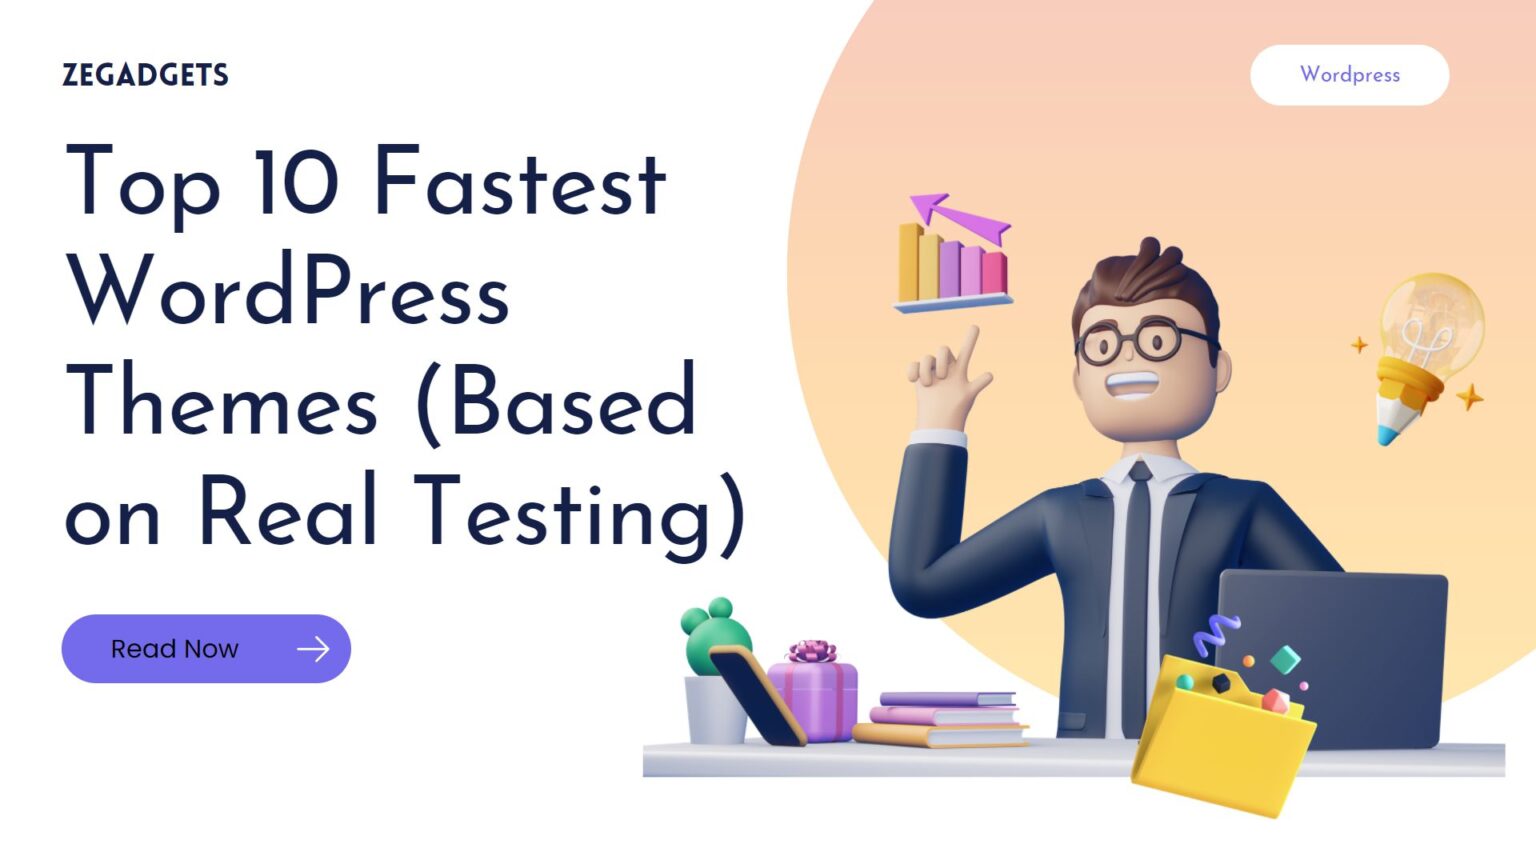 Top 10 Fastest WordPress Themes (Based on Real Testing)